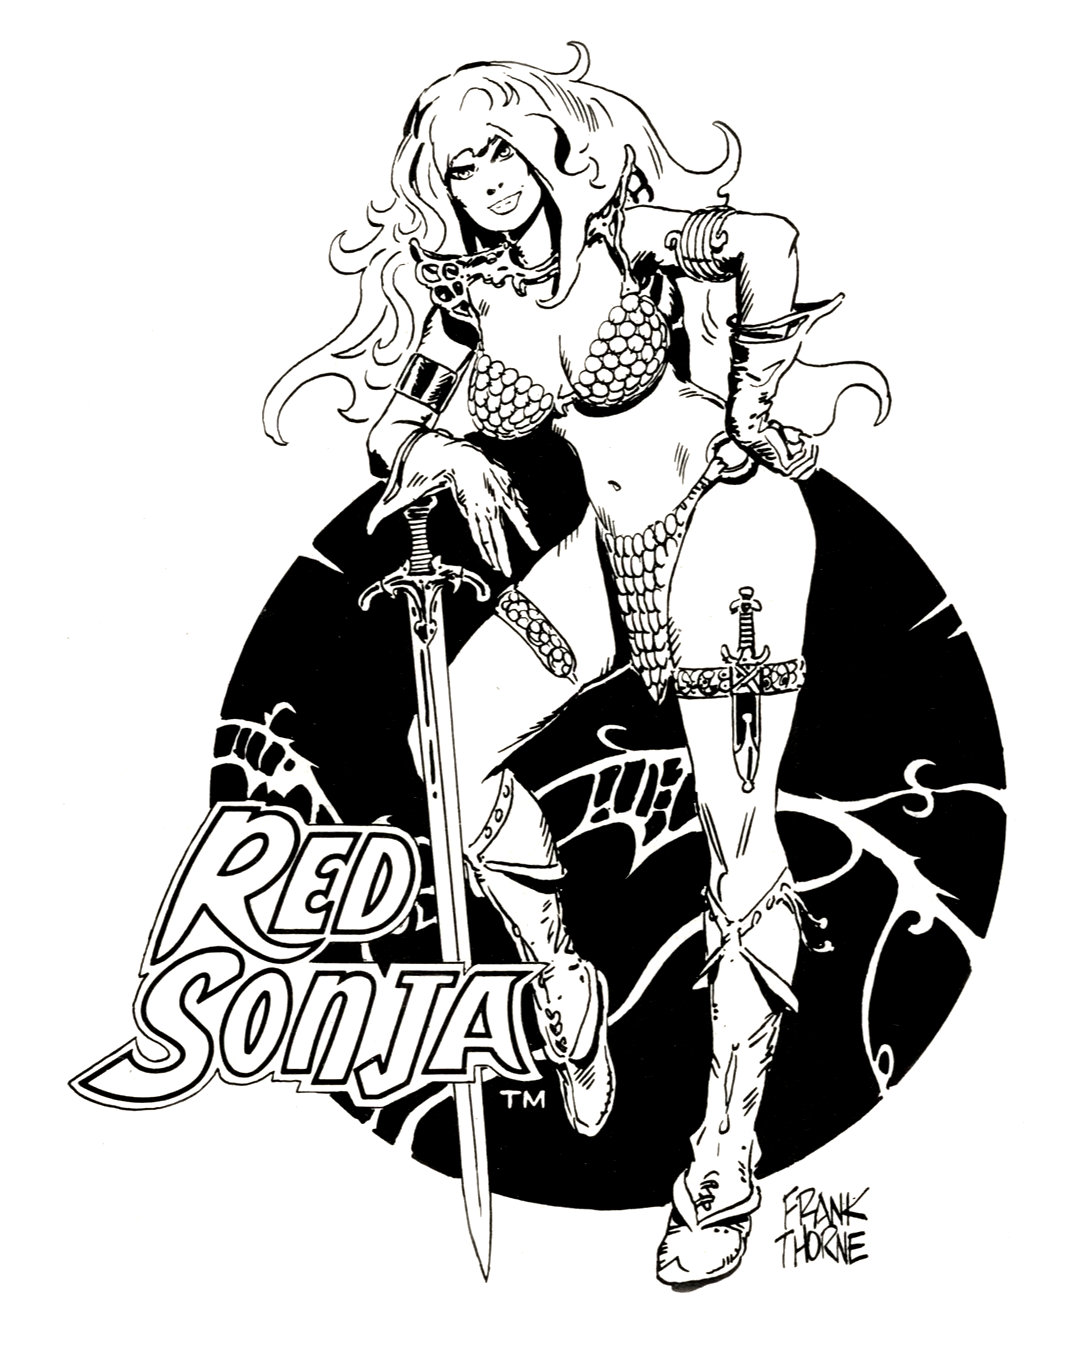 Red Sonja by Frank Thorne